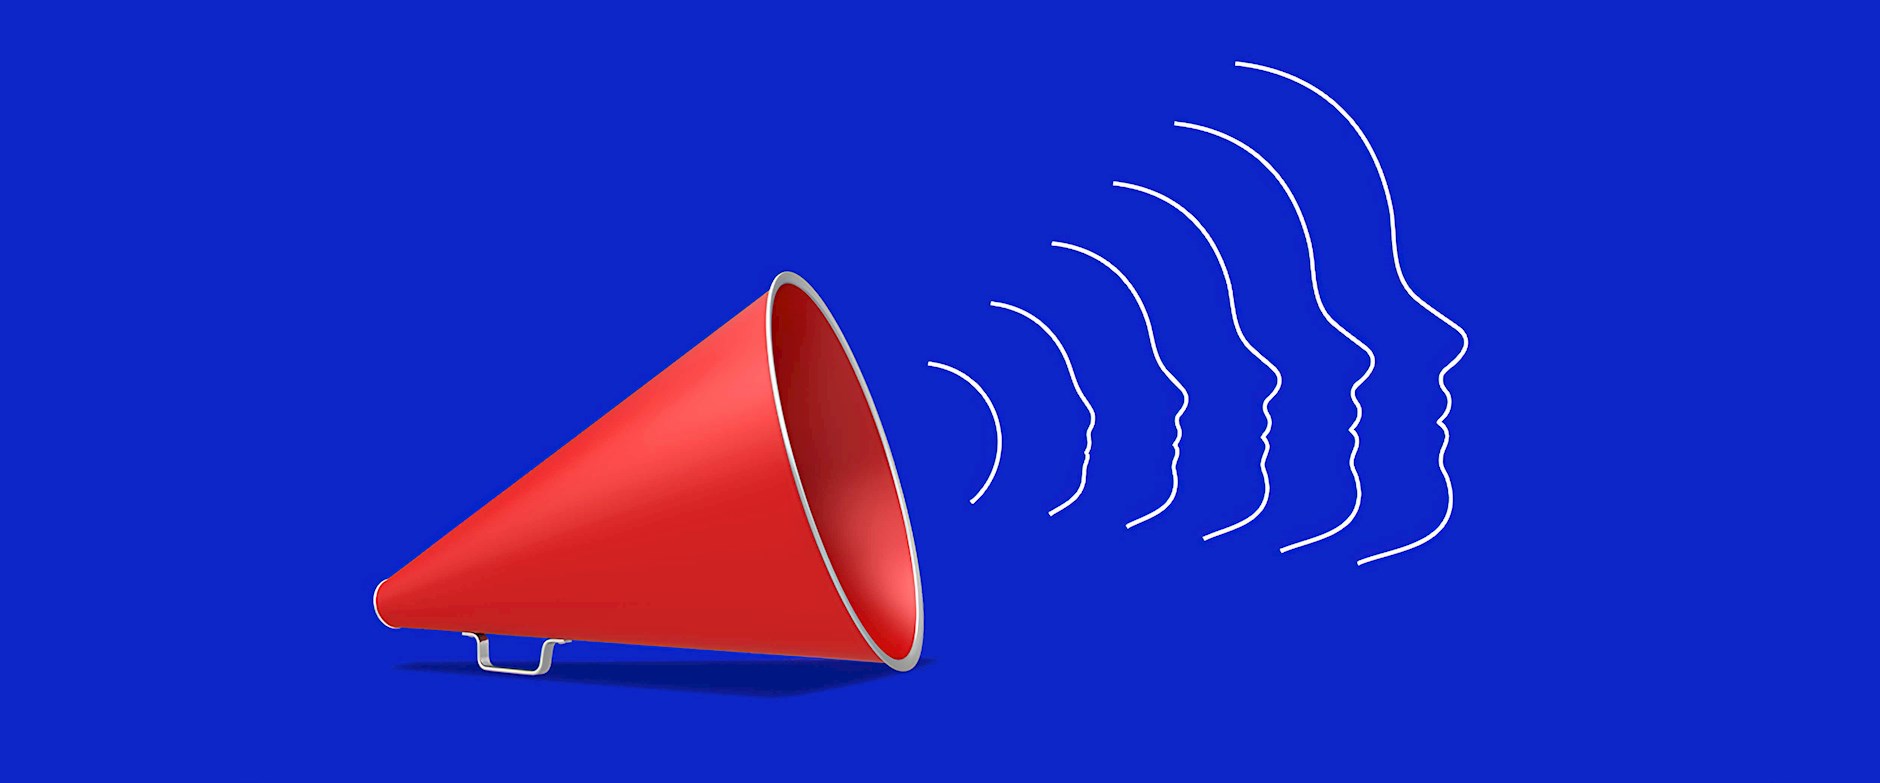 Megaphone with faces as sound waves